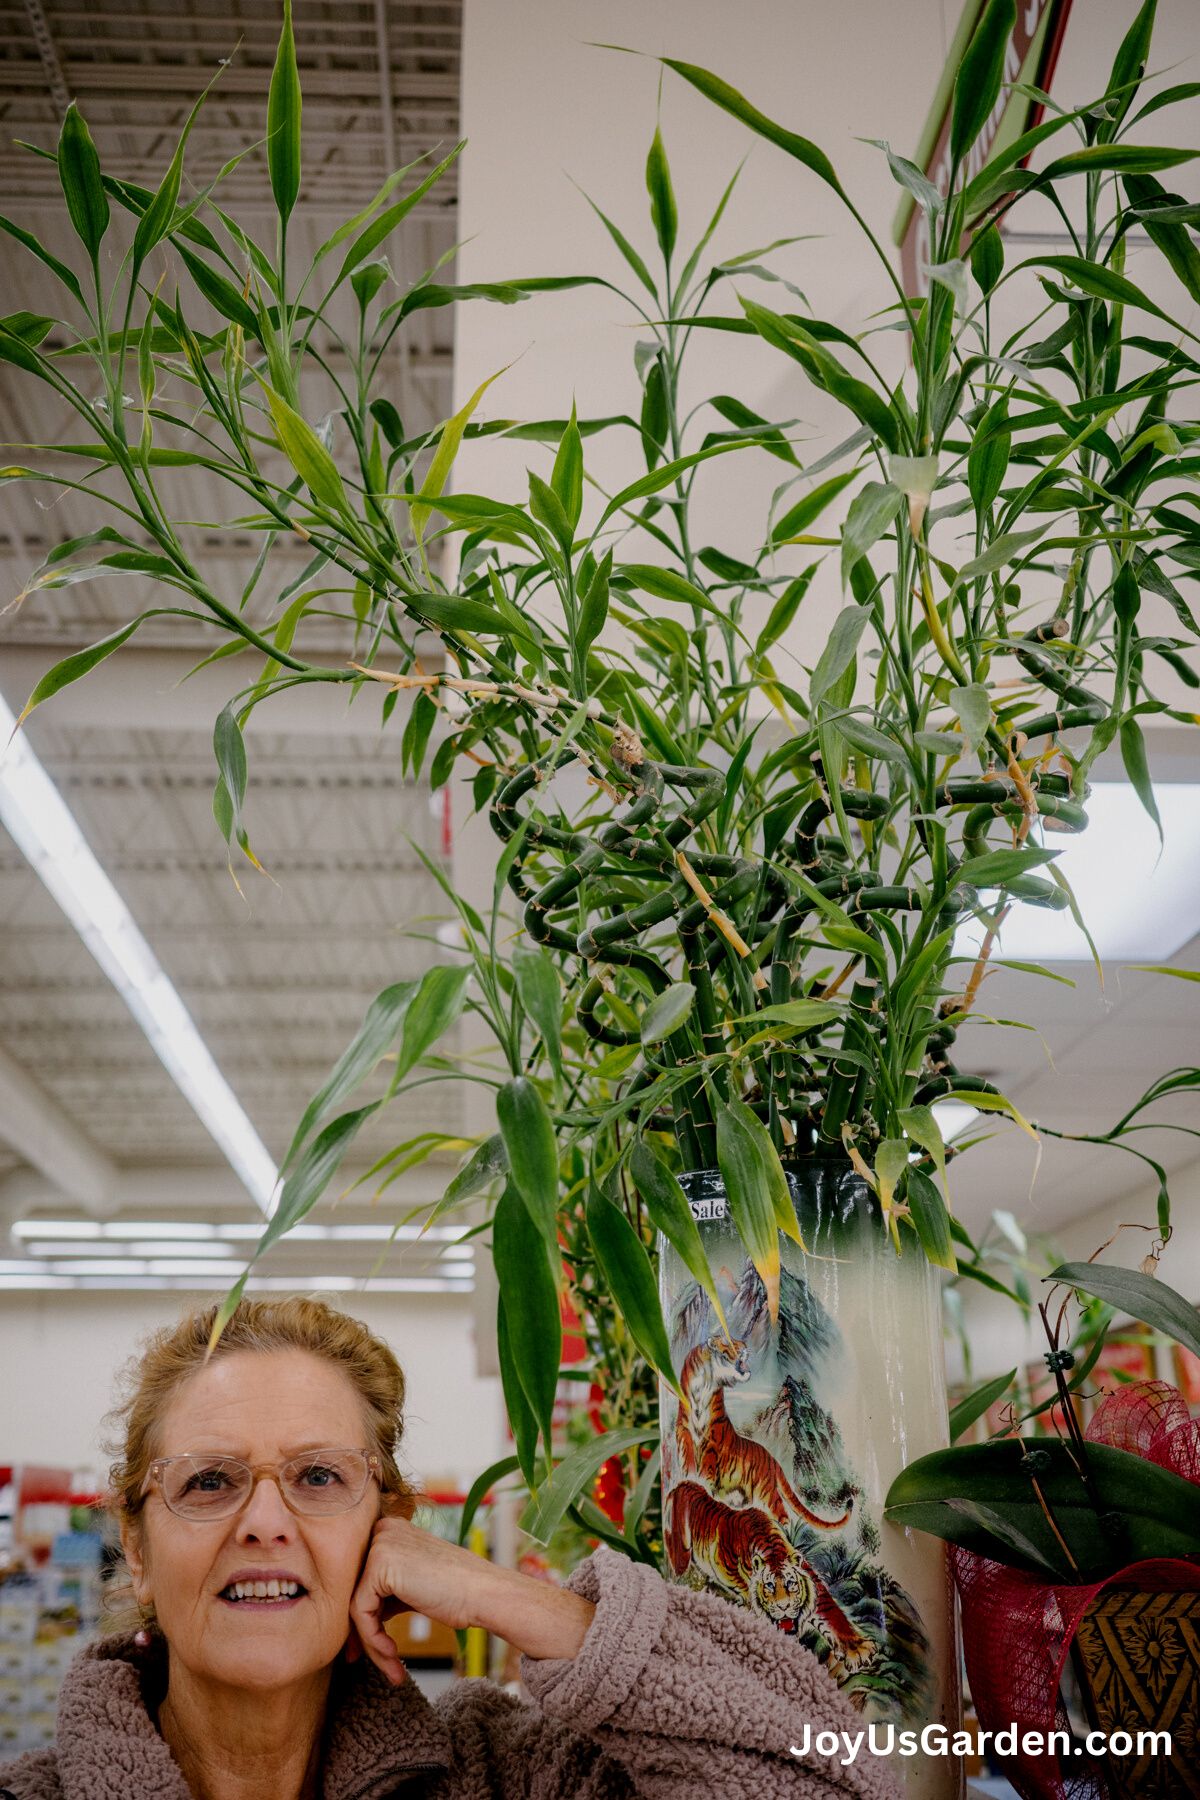 nell foster standing next to mature lucky bamboo growing in tiger design pot